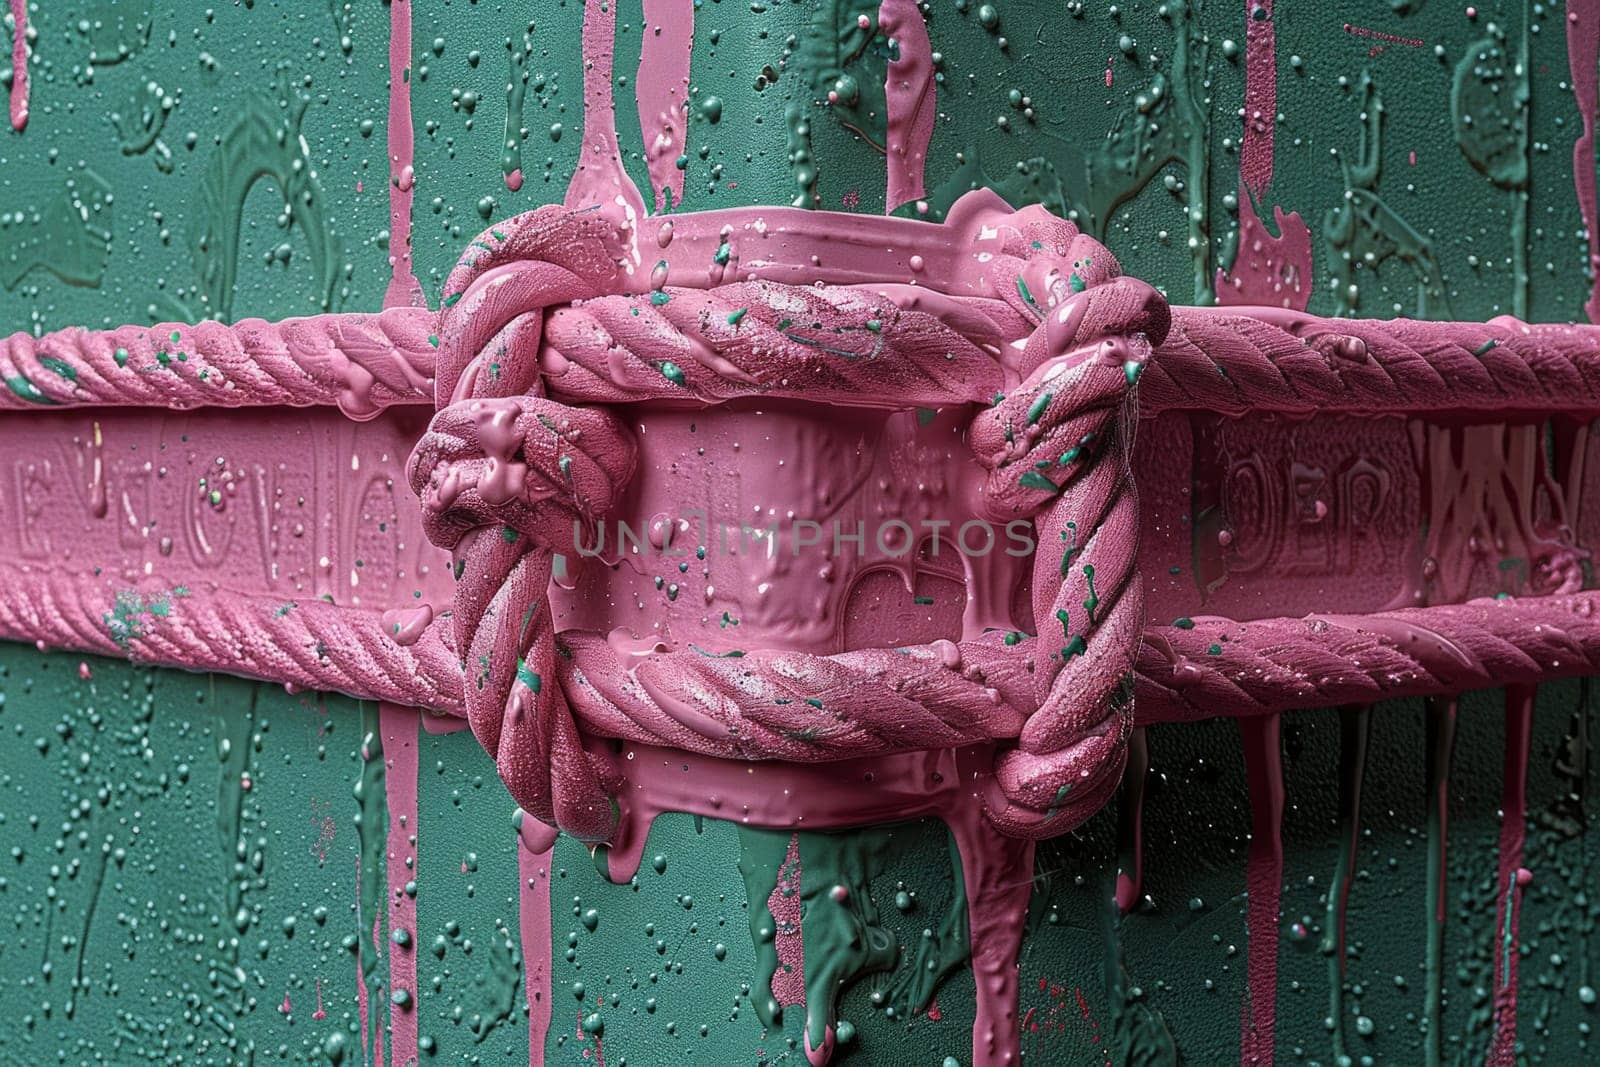 A close-up view of a plush pink ring-shaped door handle attached to a vibrant green door, embodying a sense of charm and allure.